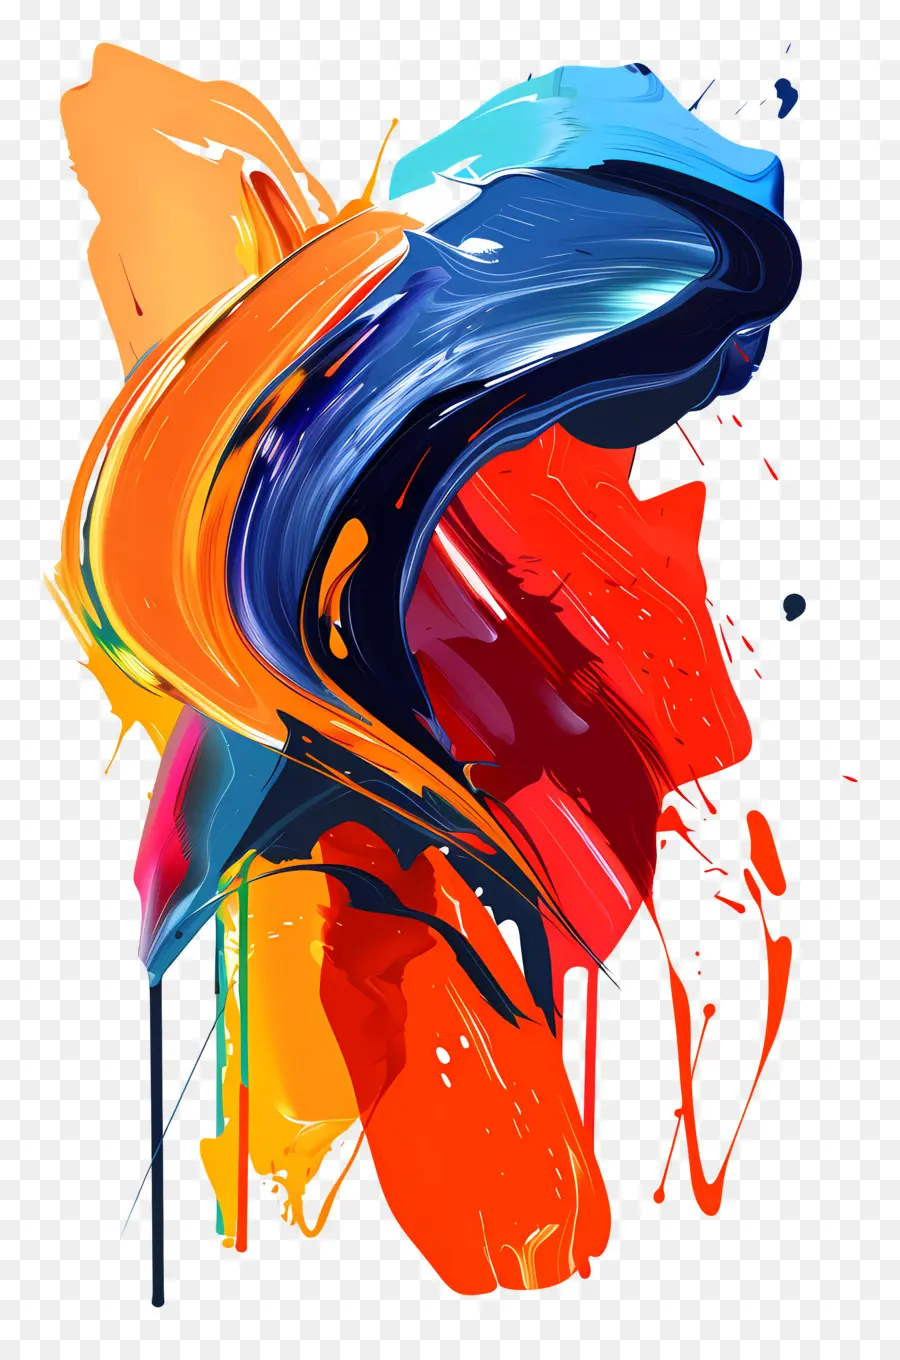 colour paint abstract art colorful painting vibrant colors brushstrokes